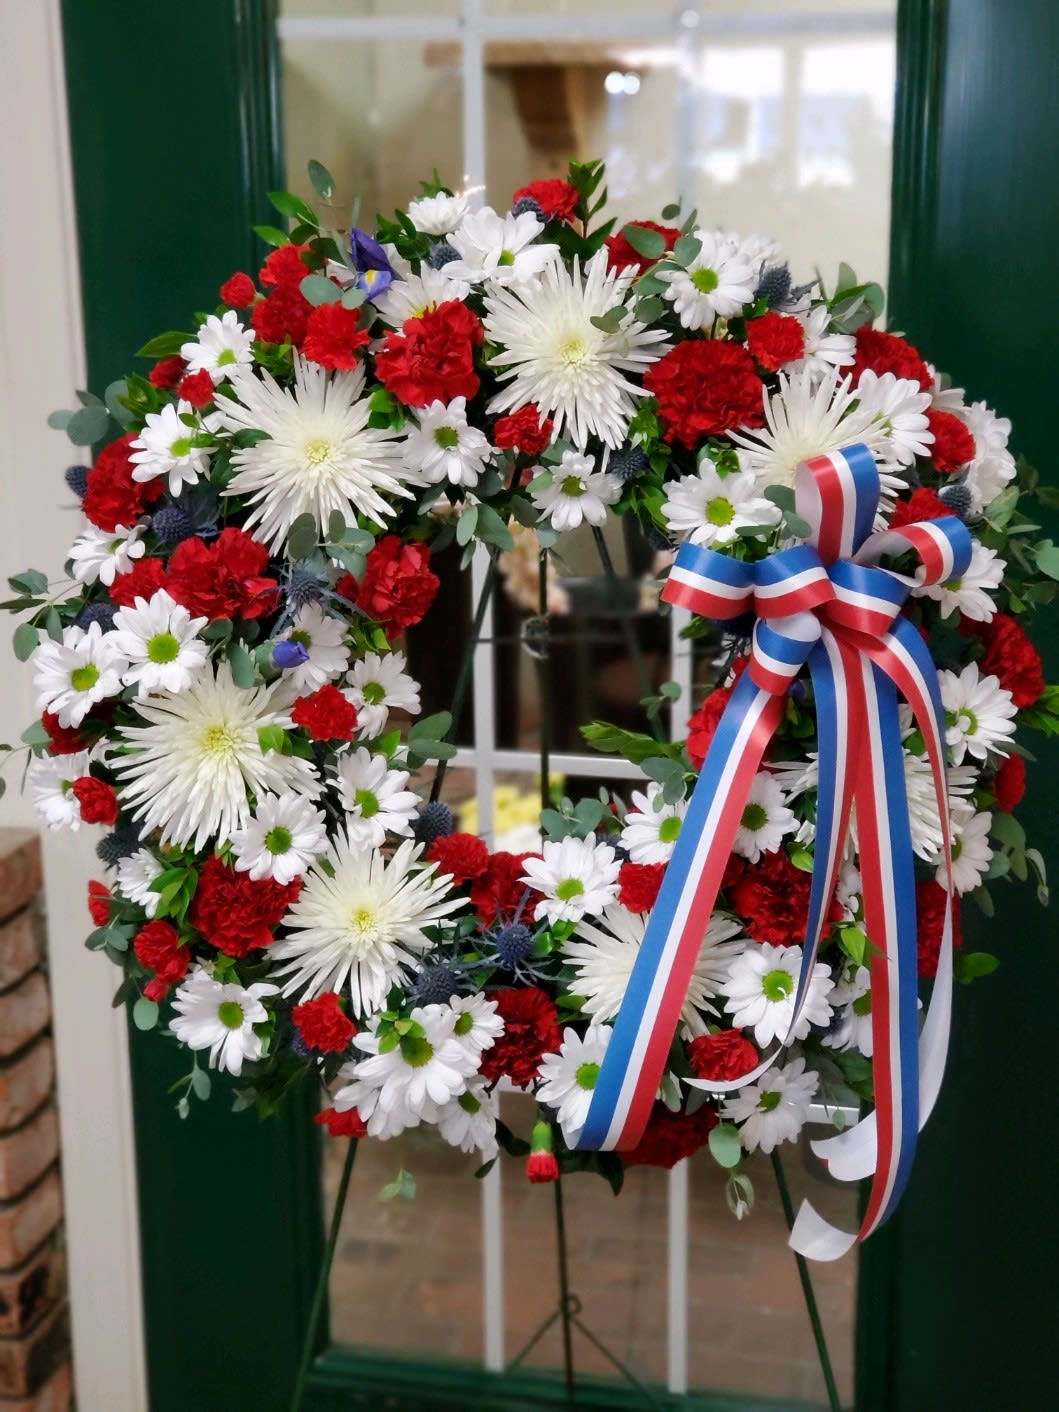 Patriotic Wreath  - Wreath on an easel with red, white and blue flowers to include, Chrysanthemums, carnations, daisies, thistle, greenery with a red, white and blue bow